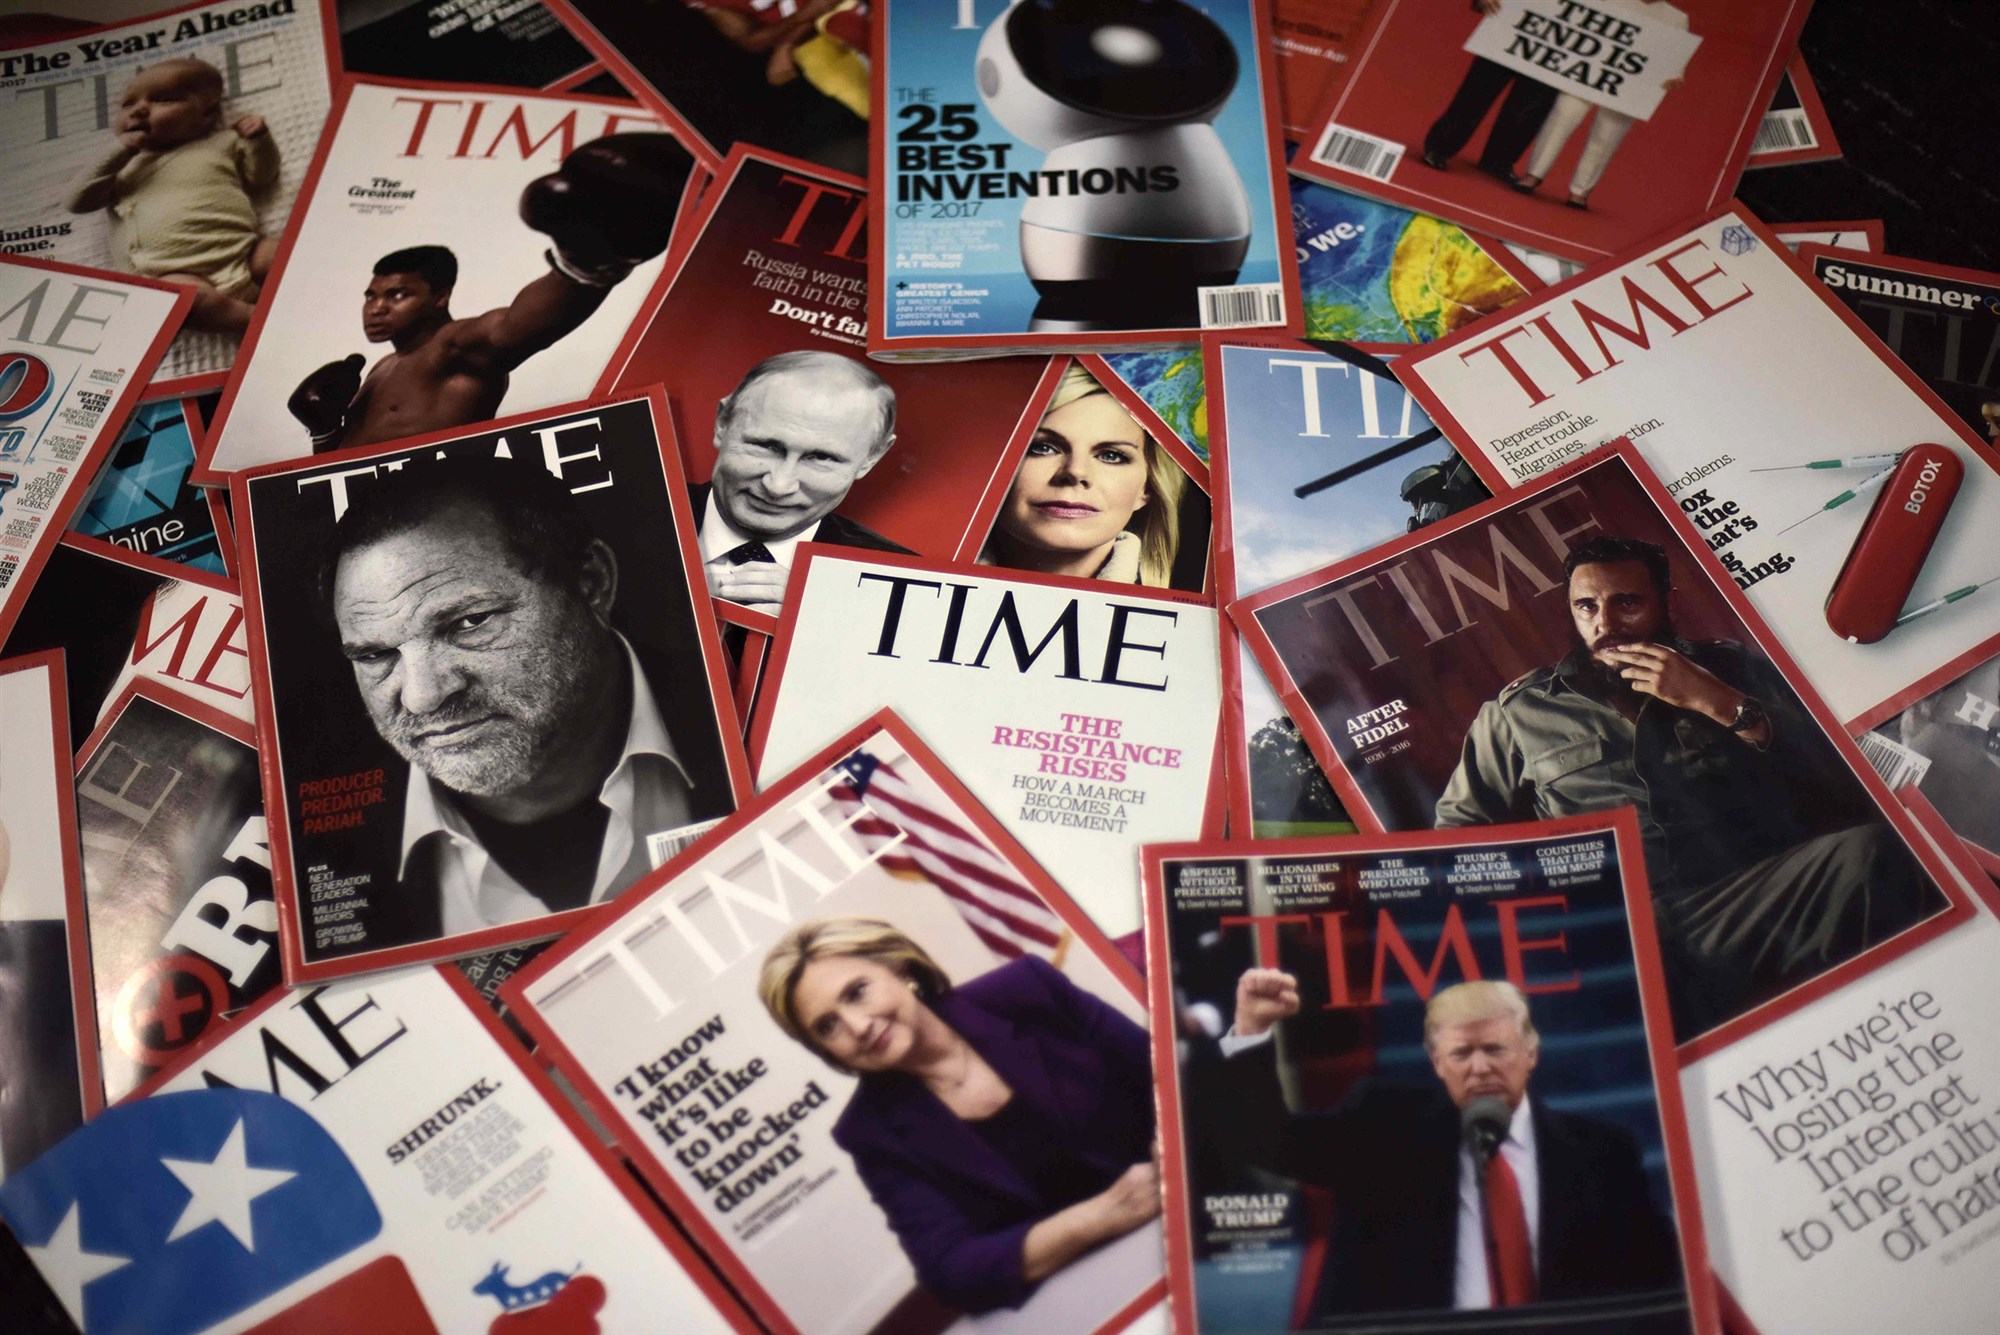 Time Magazine acquired by Marc Benioff and wife Lynne Benioff